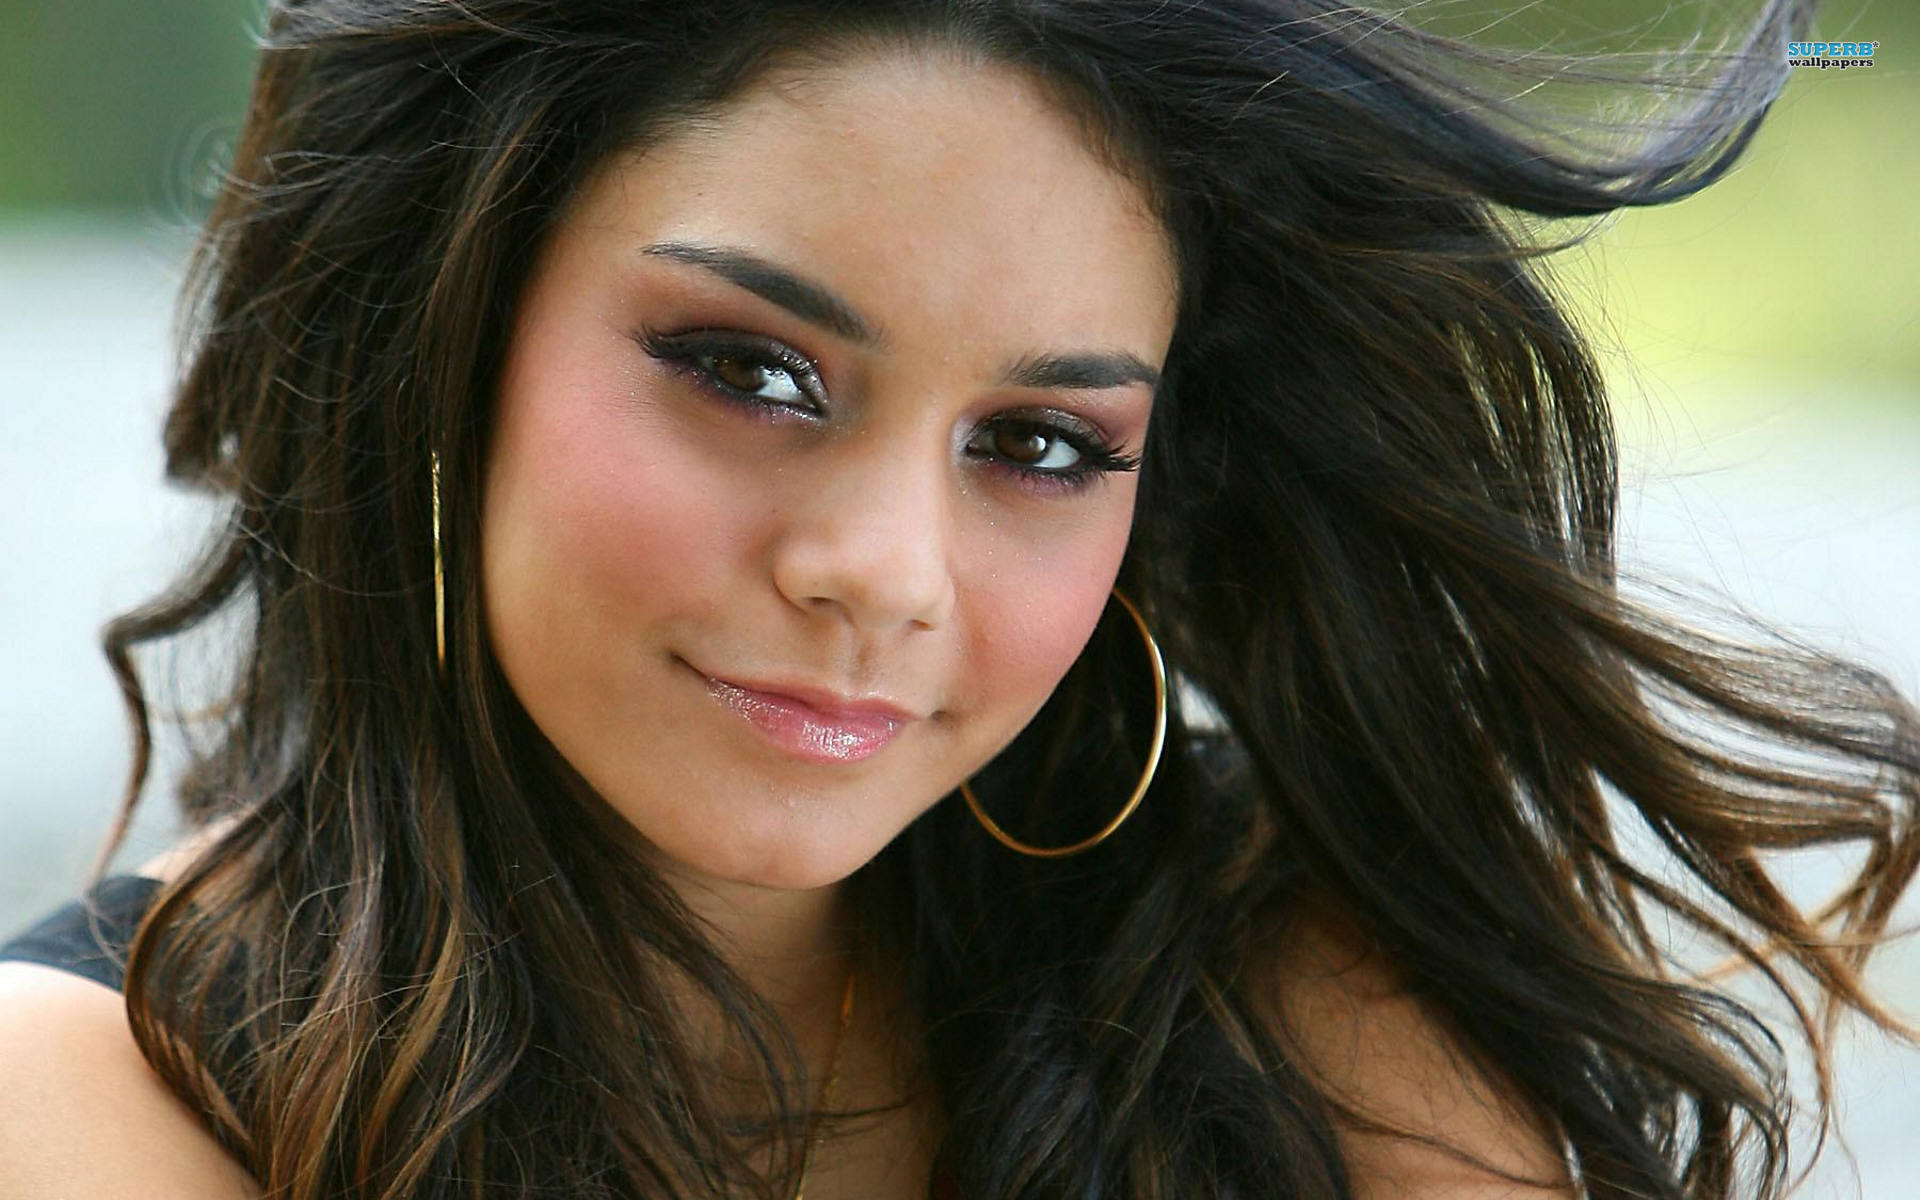 Discover The Beauty And Talent Of Vanessa Hudgens: A Rising Hollywood Star